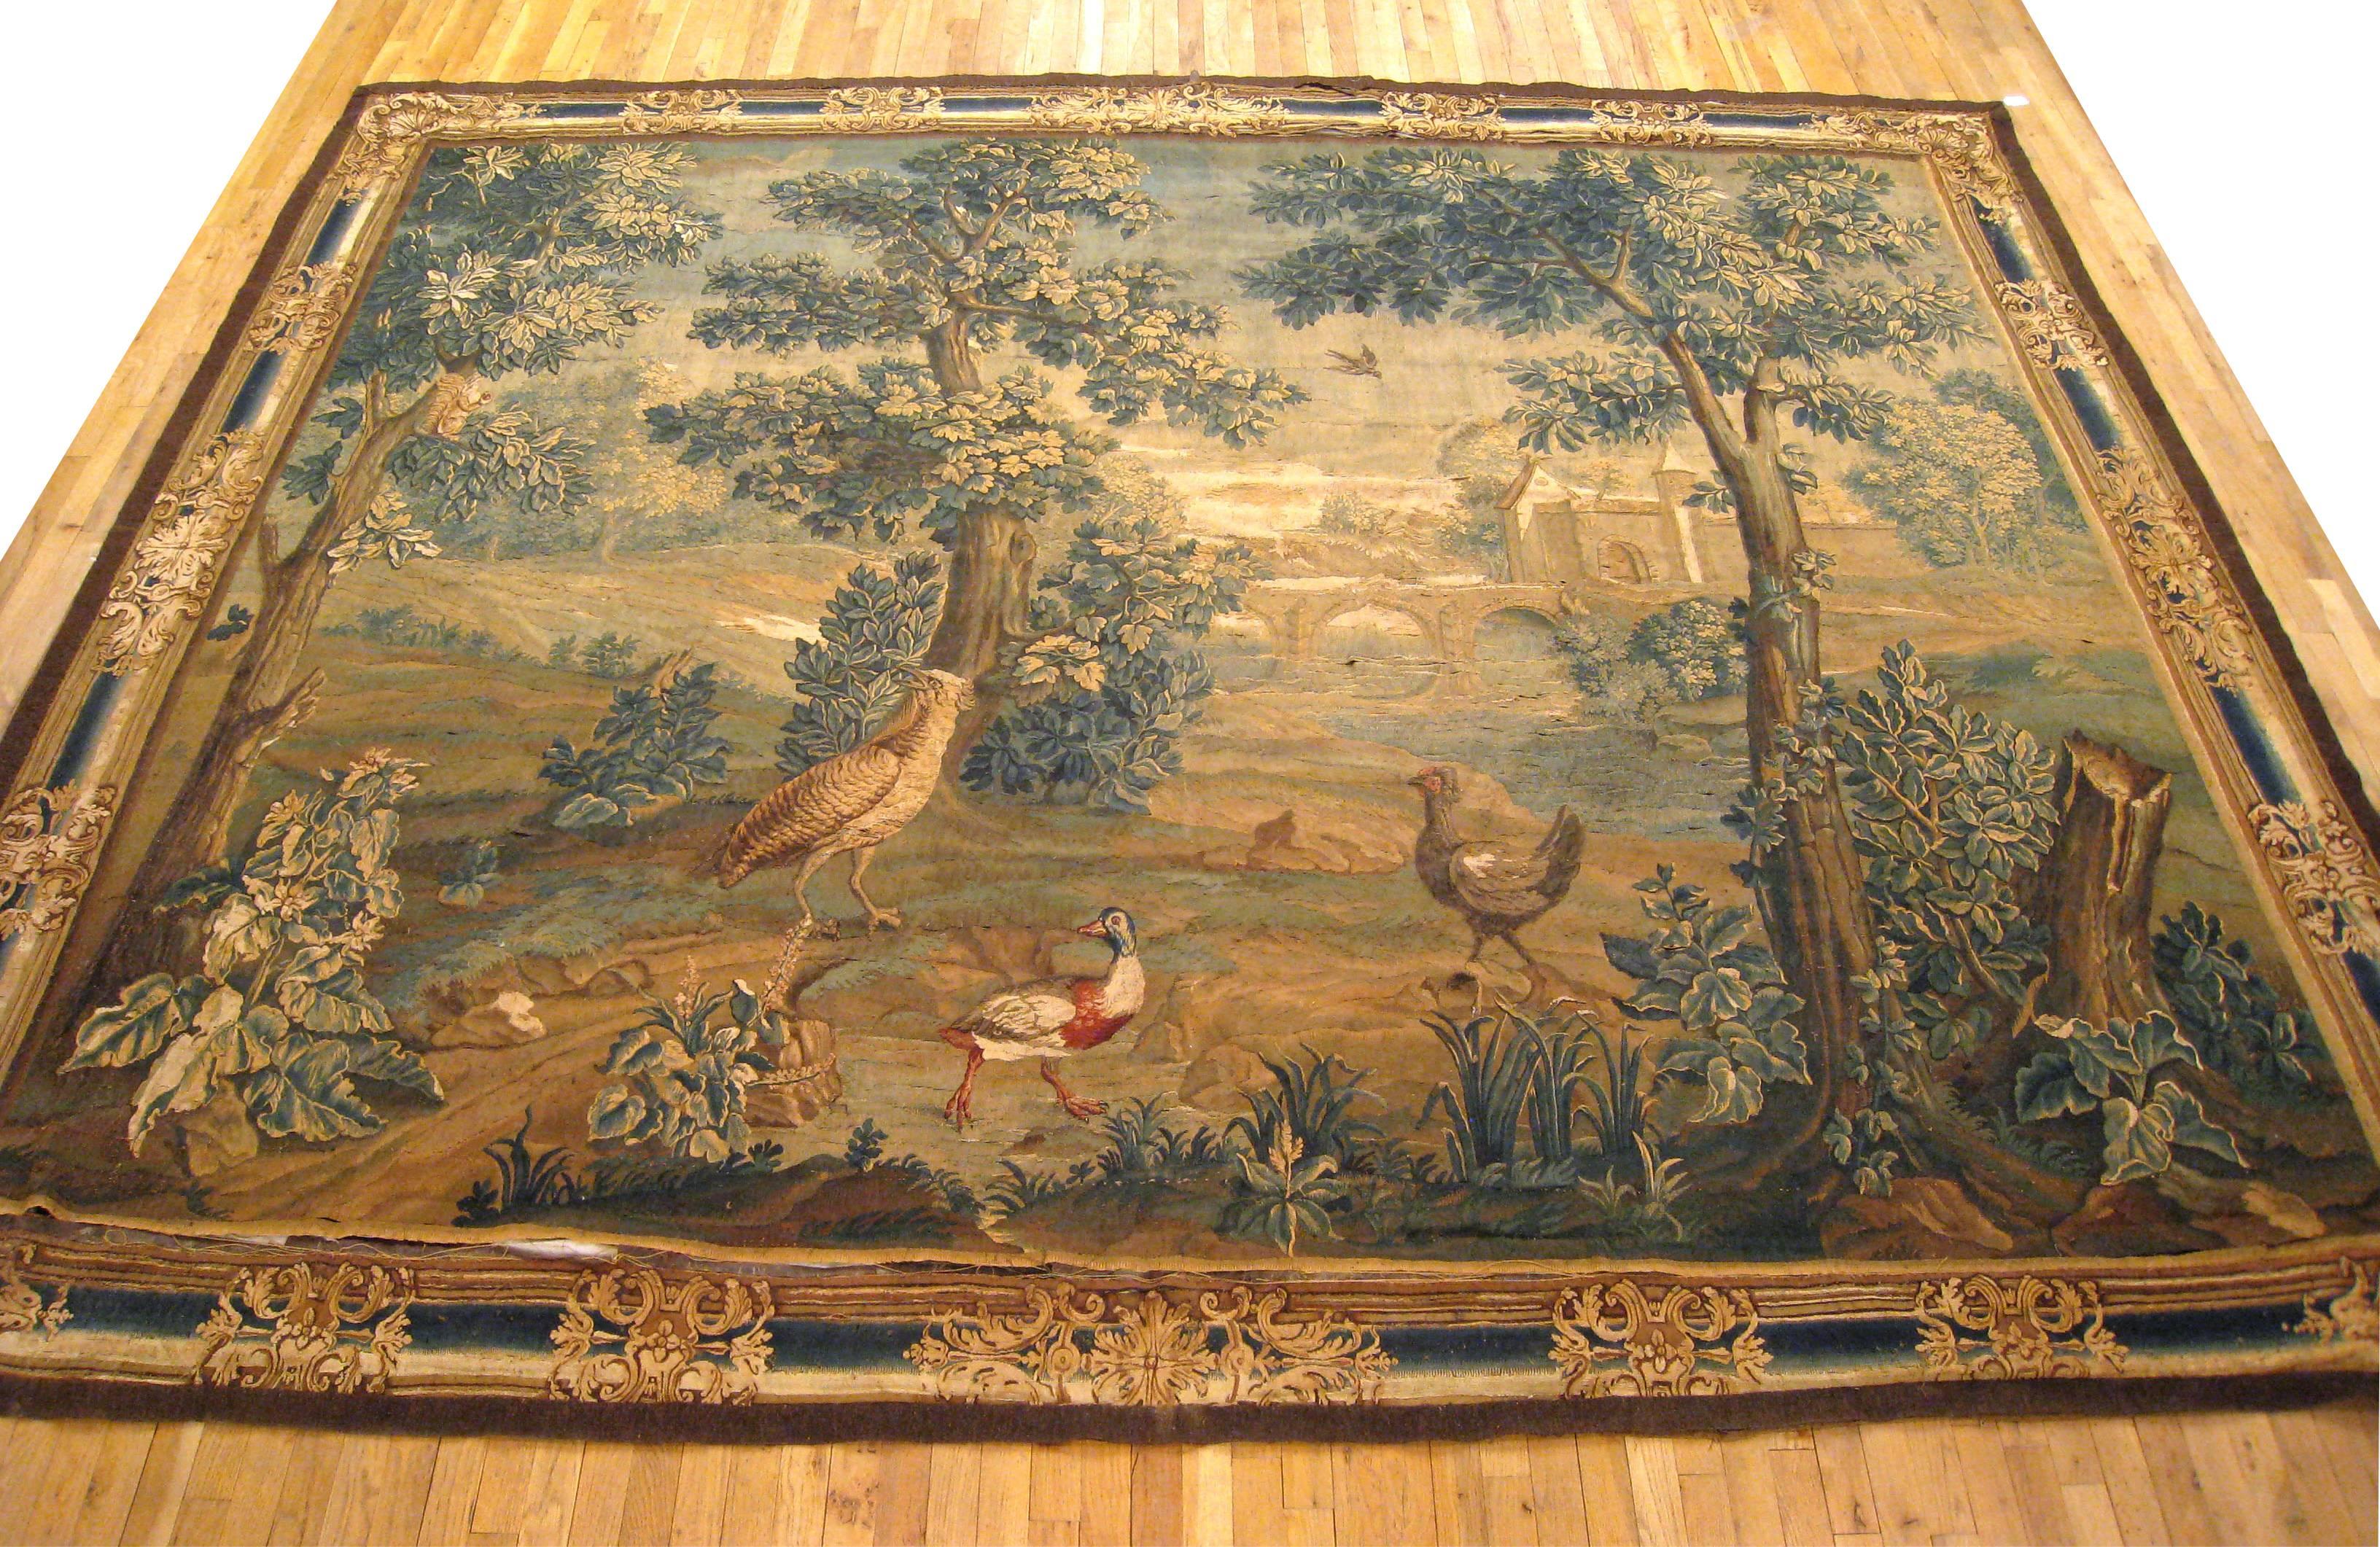 An antique 18th century French Beauvais landscape verdure tapestry, size 12'1 H x 10'1 W. This tapestry features a group of birds in a verdant woodland setting near a bridge, with the birds appearing at center between trees, acanthus plants, and